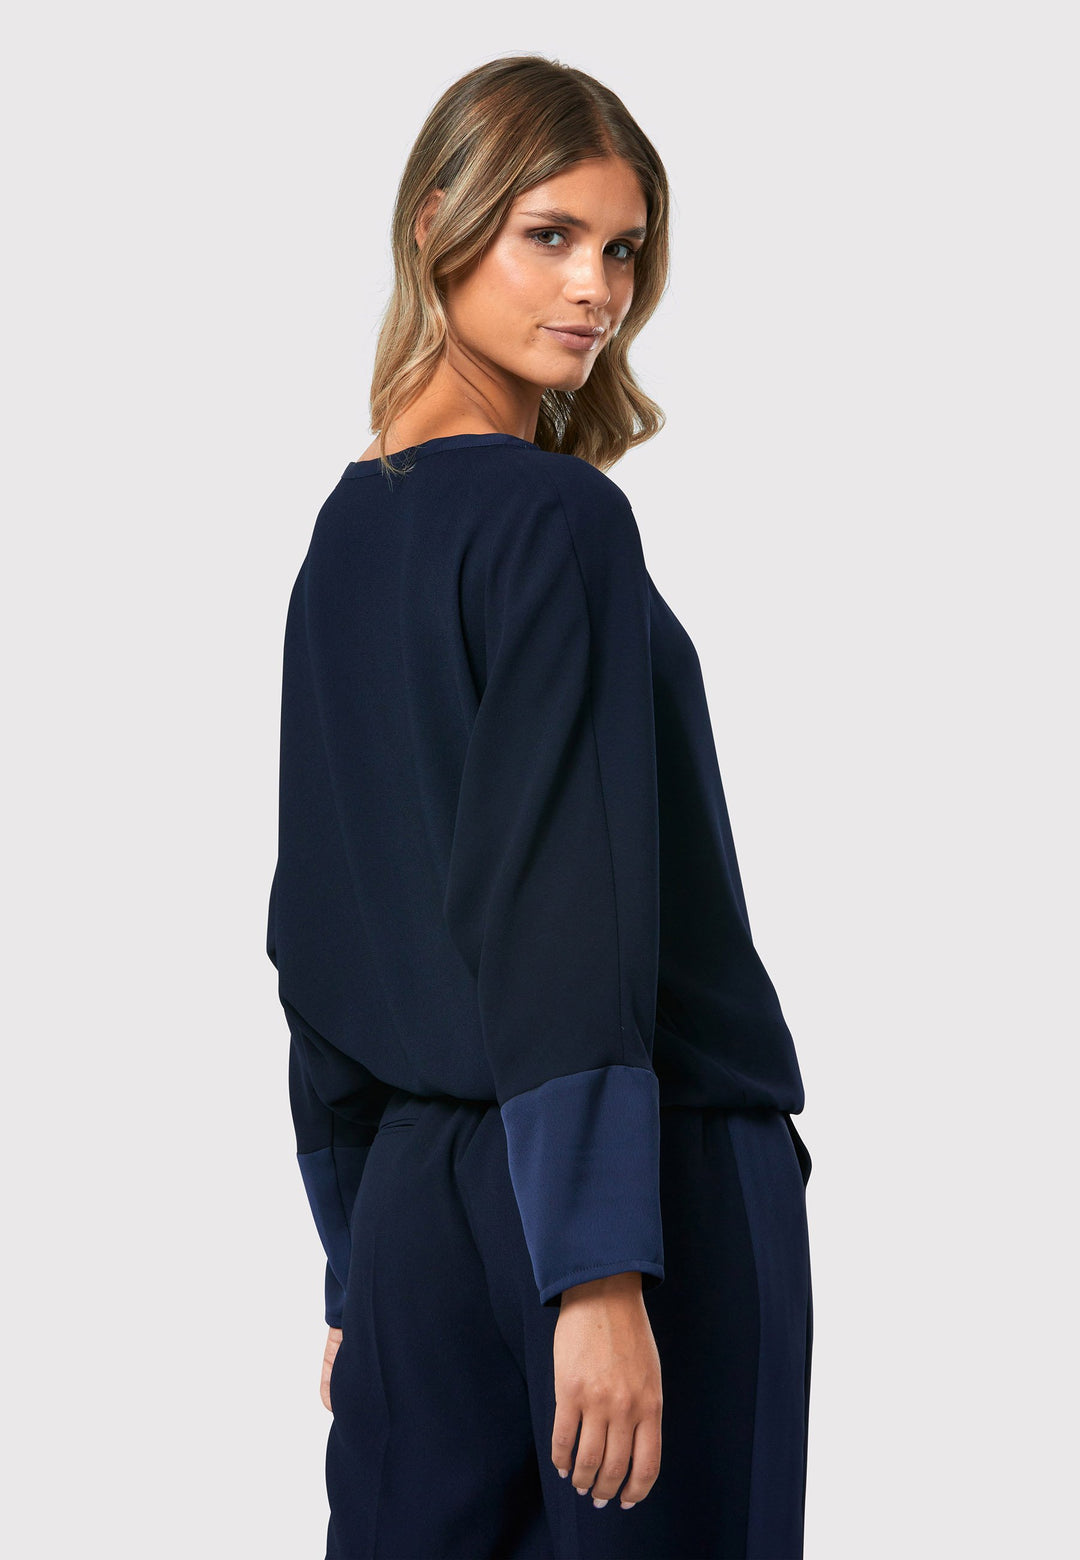 al Midnight Navy Top, a stylish and versatile addition to your wardrobe. Crafted from satin back crepe, it offers a luxurious feel and drapes beautifully. The dropped shoulder design, eleasticated hem and full-length sleeves 